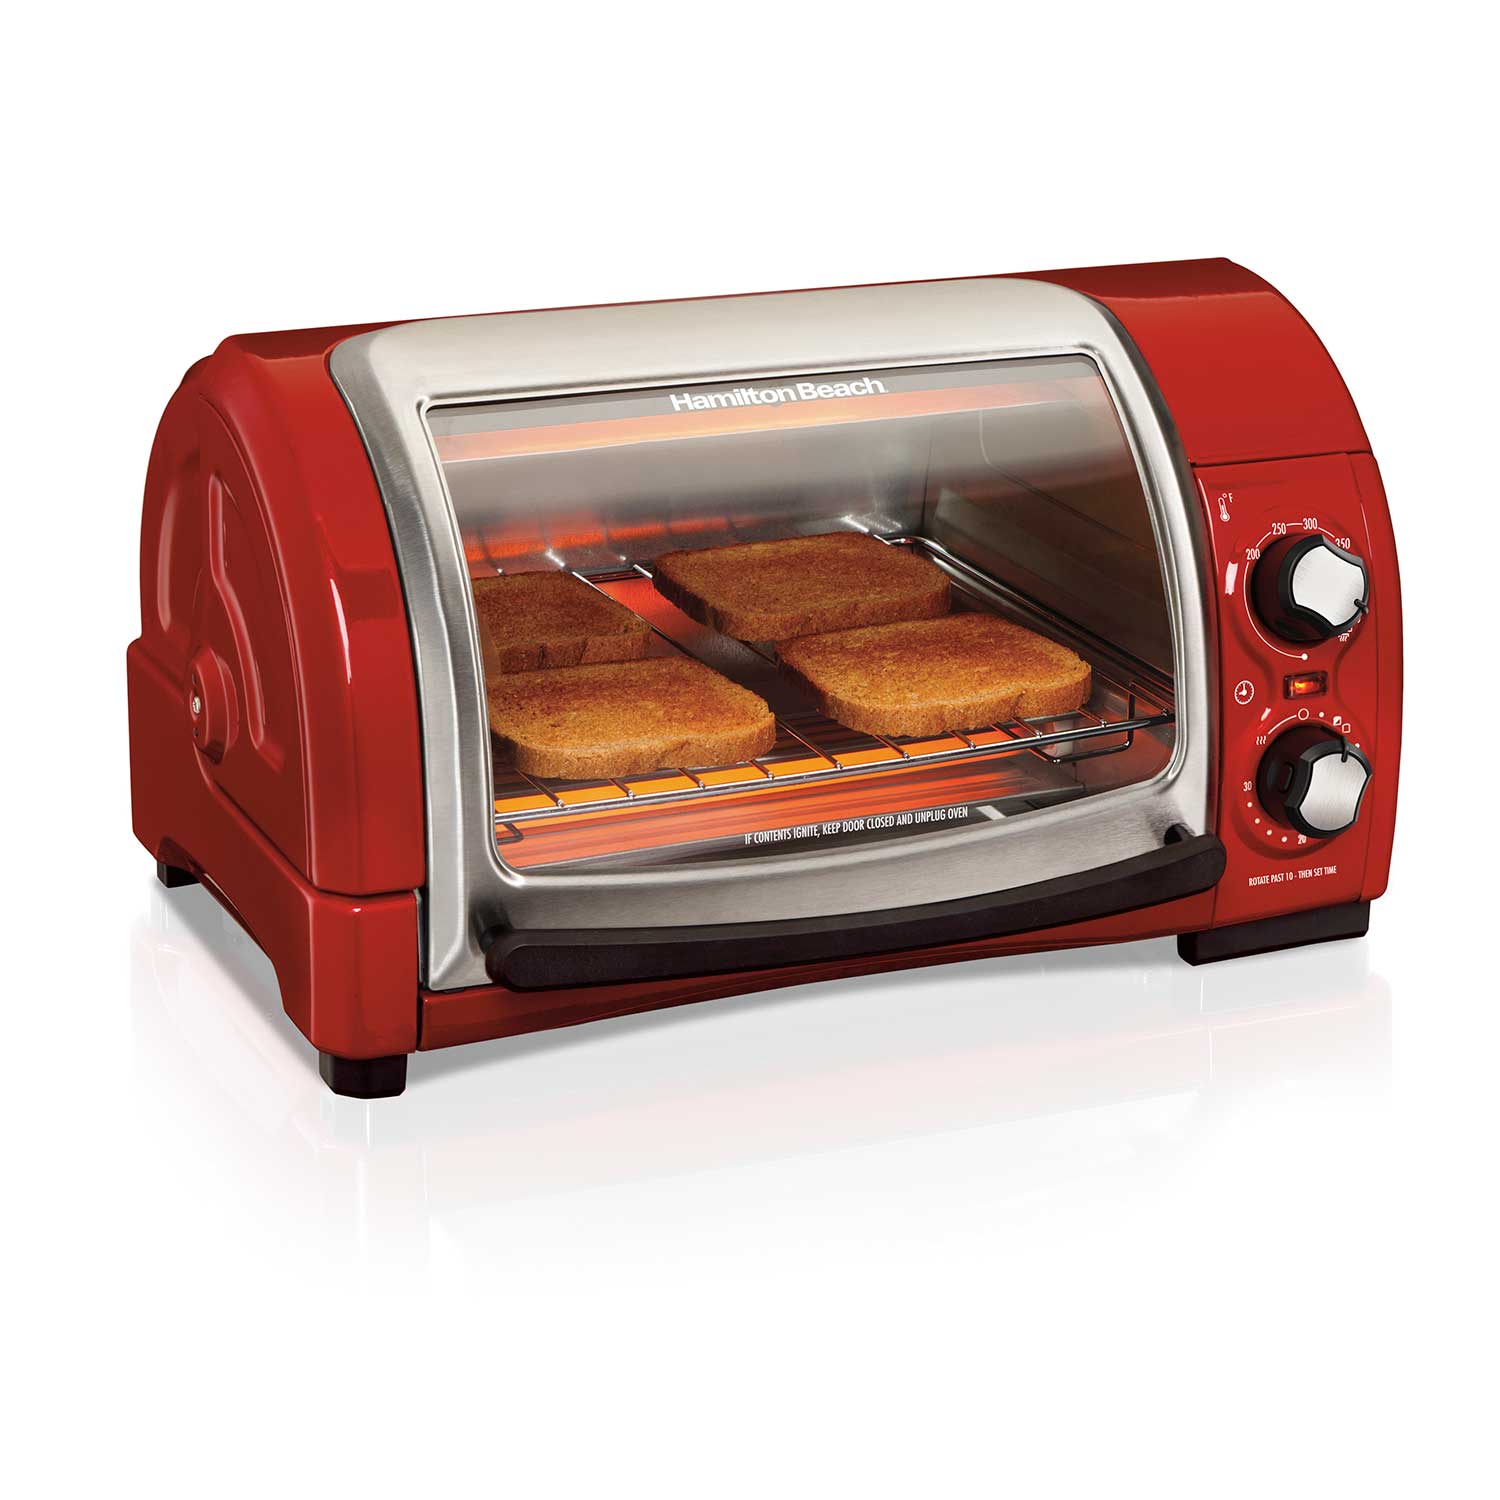 Easy Reach® Toaster Oven with Roll-Top Door, Red (31337D)